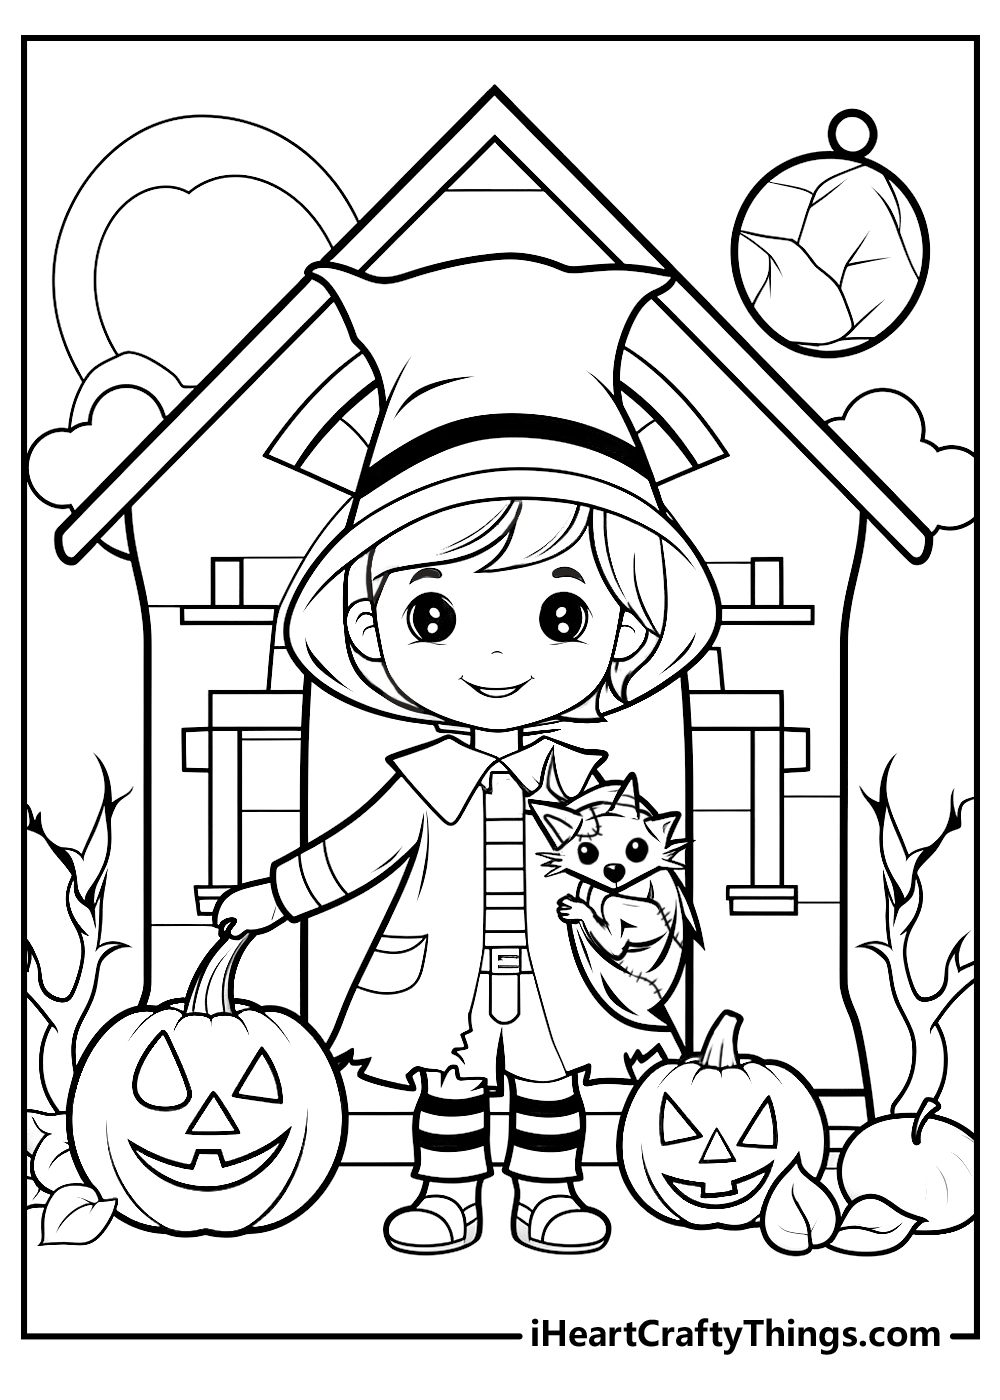 Trick-Or-Treat Bag Coloring Page - Super Simple